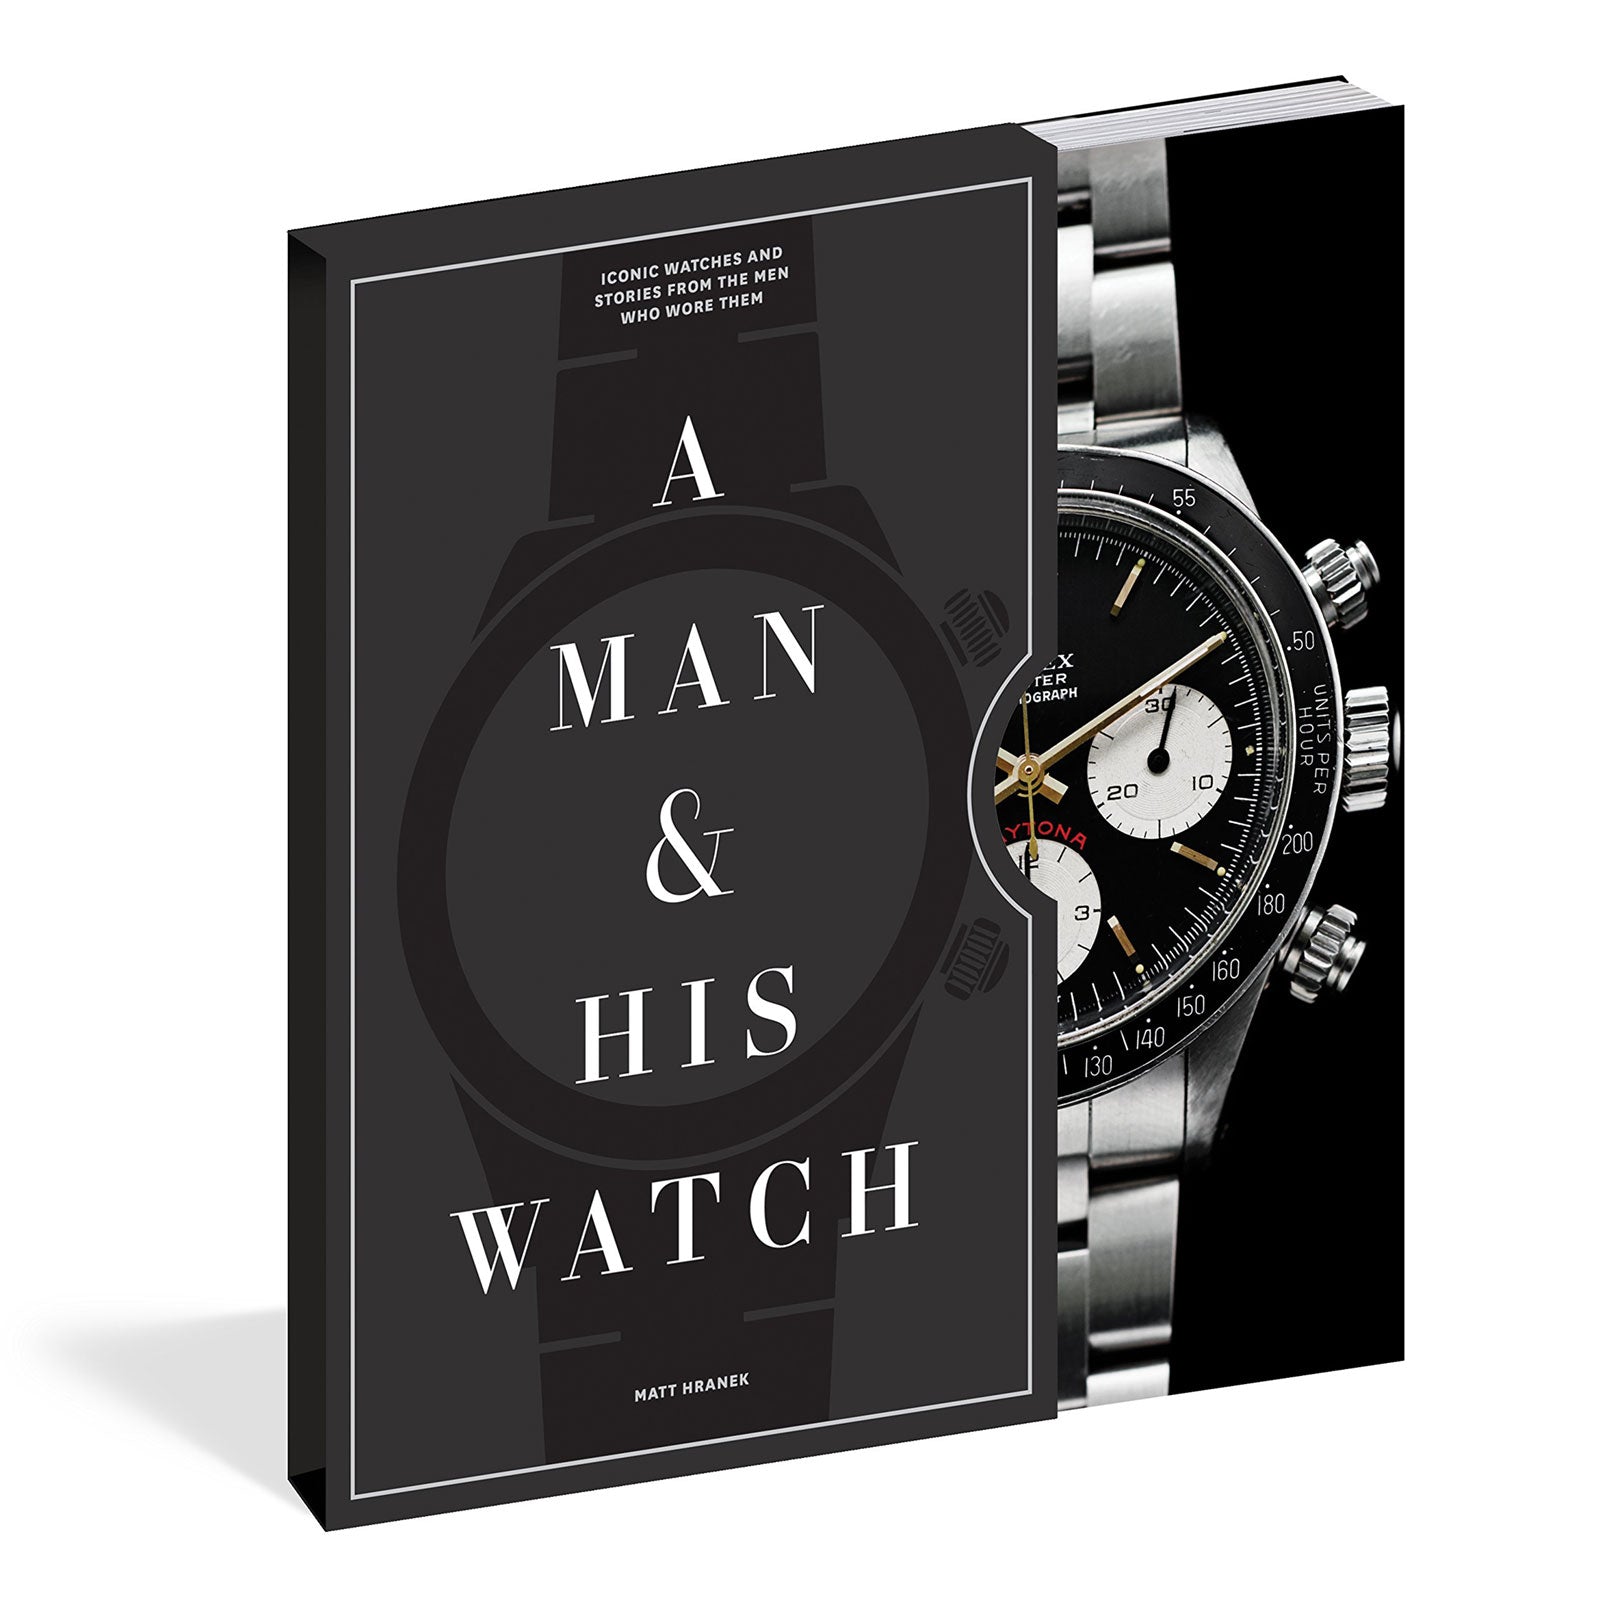 A Man + His Watch book cover.